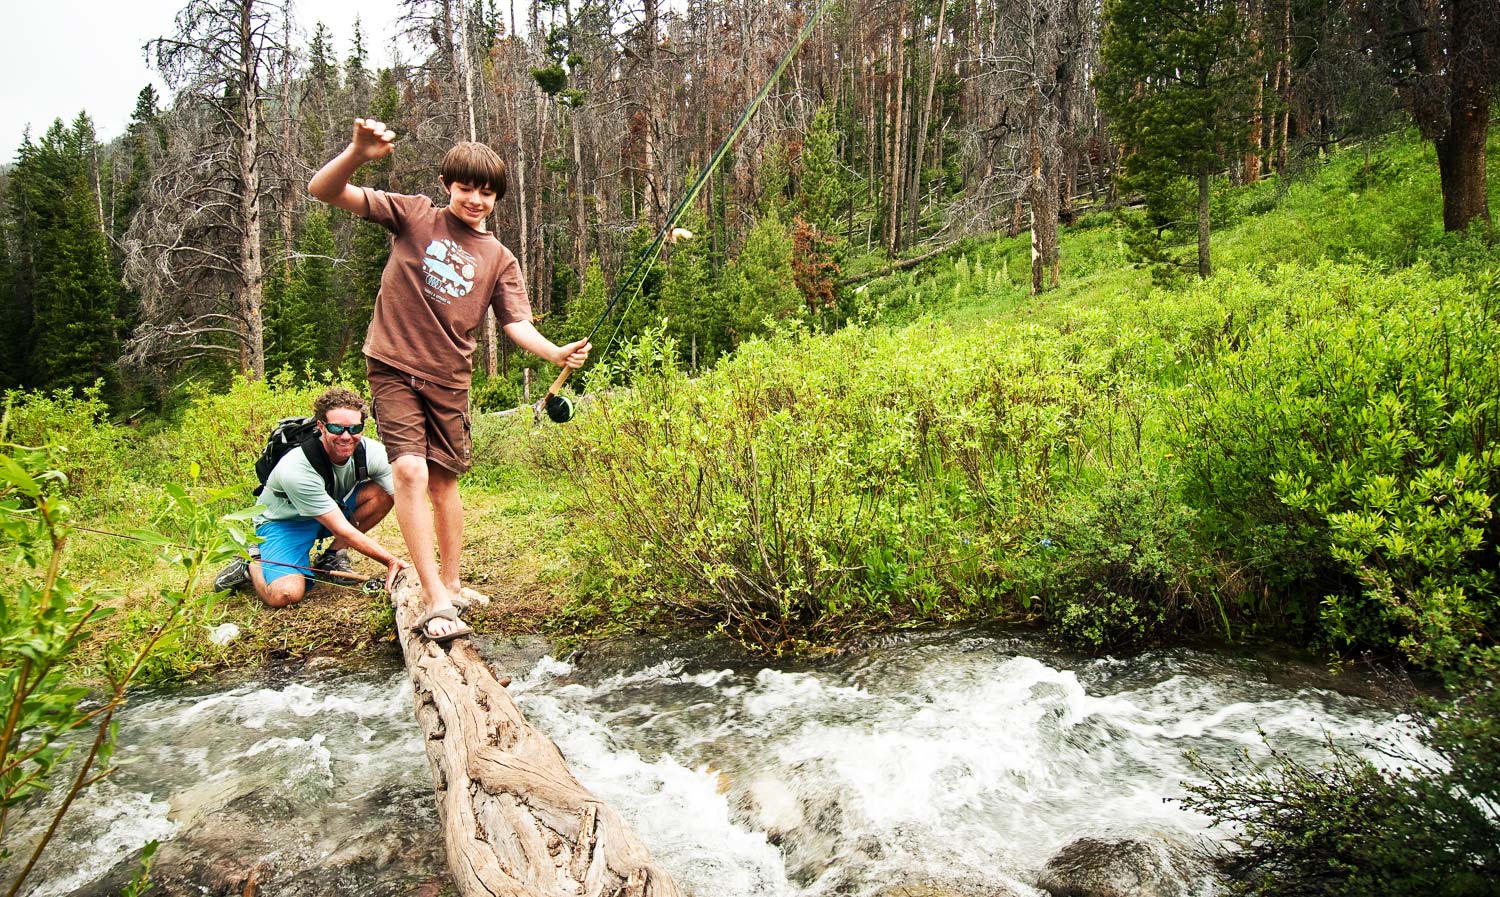 Buying A Fly Rod For The Young Beginner - Fly Fishing